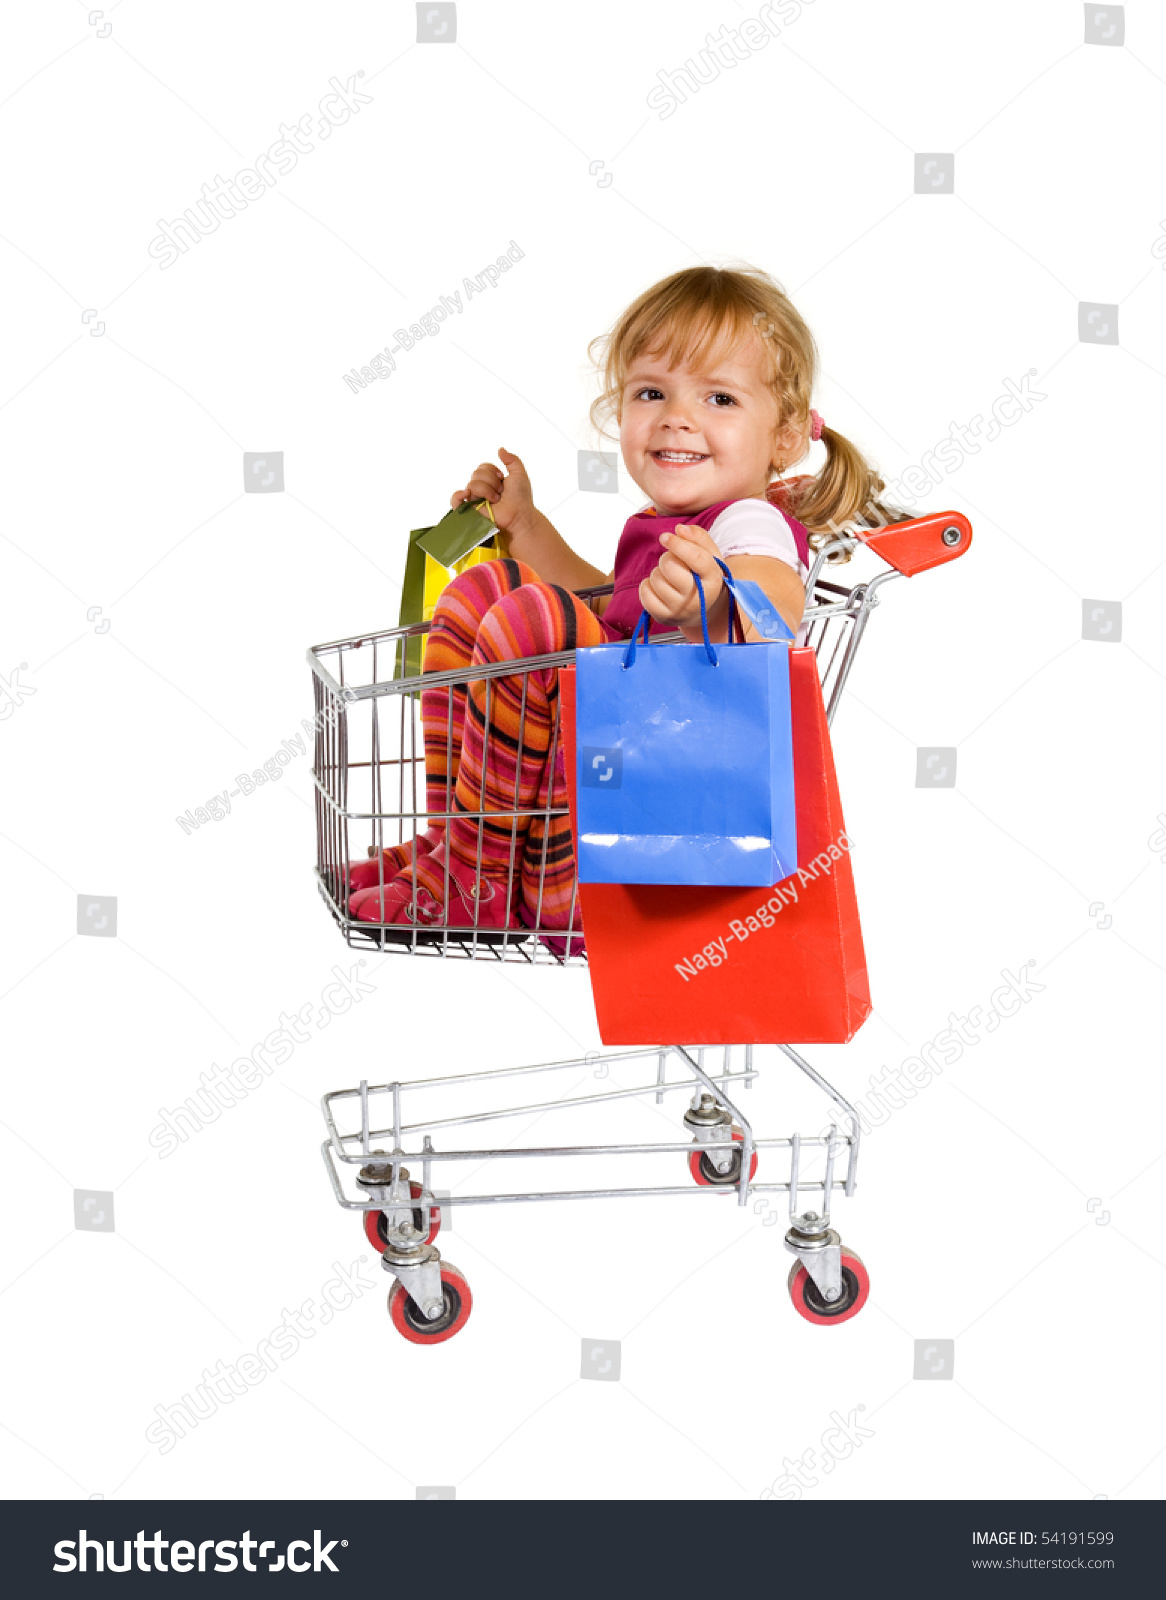 Shopping Is Fun - Little Girl Sitting In A Cart With Colorful Bags ...